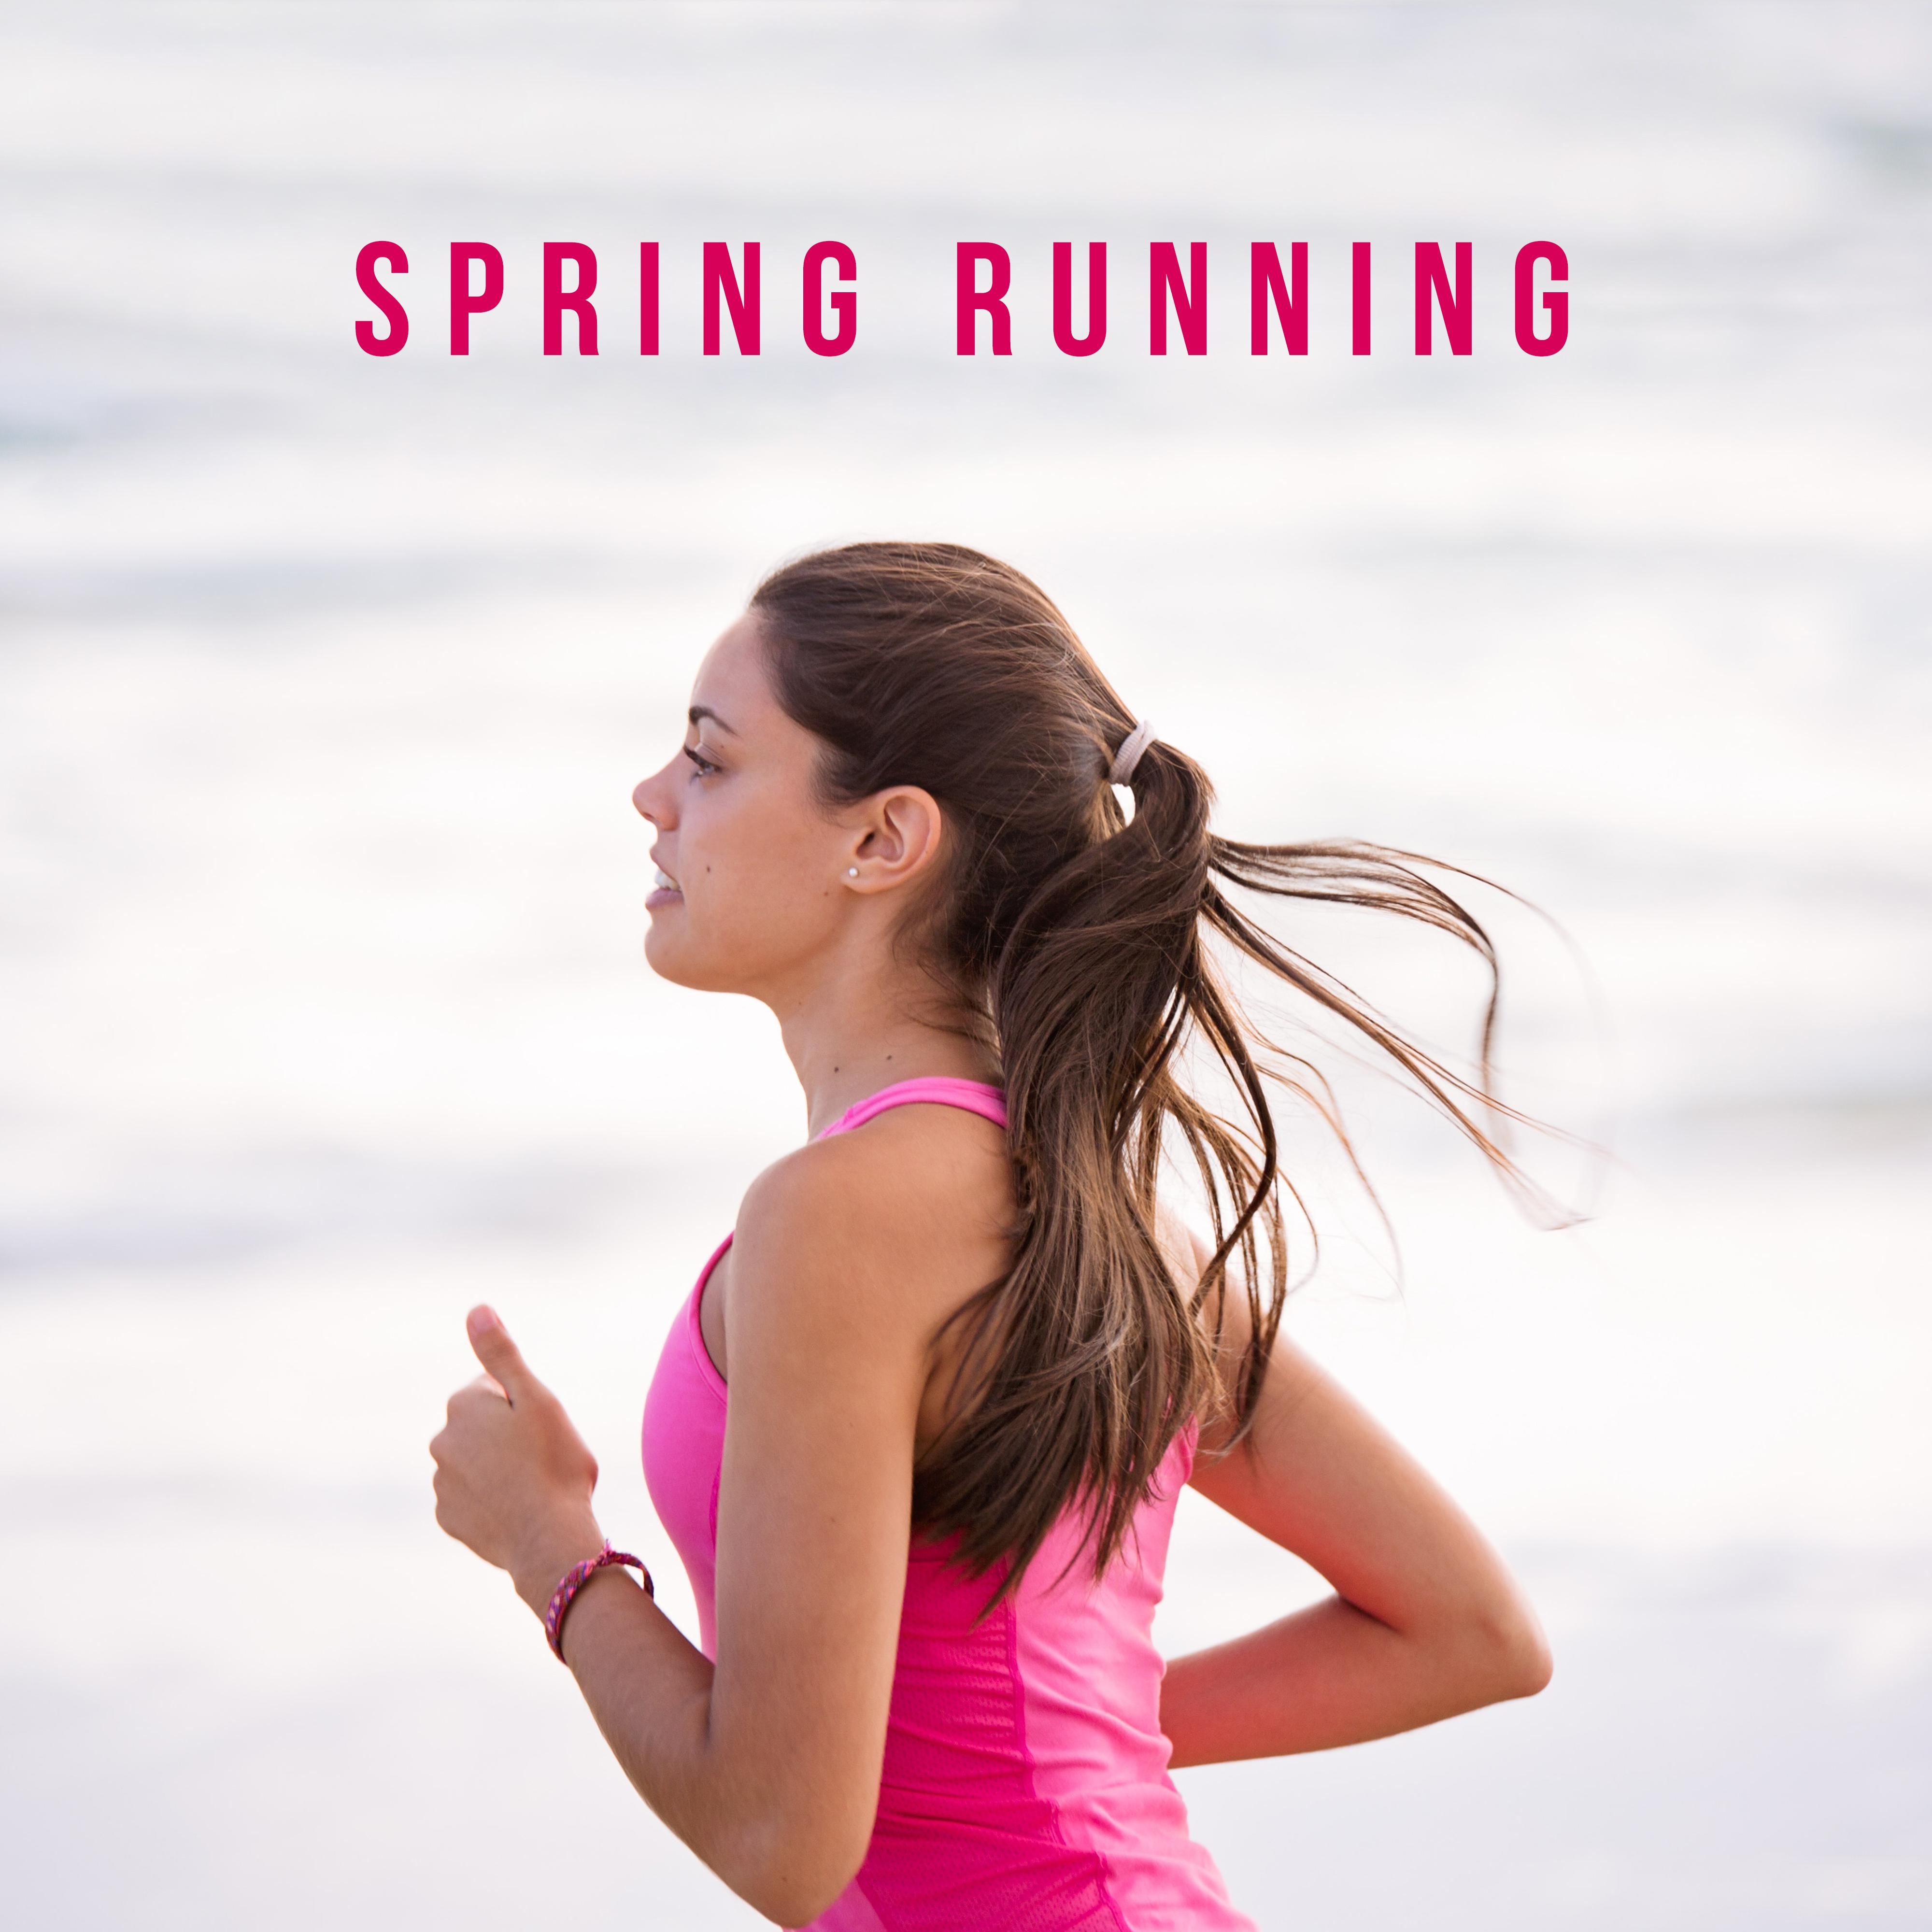 Spring Running  Chill Zone Music, Chillout Sounds for Training, Running Music 2019, Ibiza Chill Mood, Spring Chill Out 2019